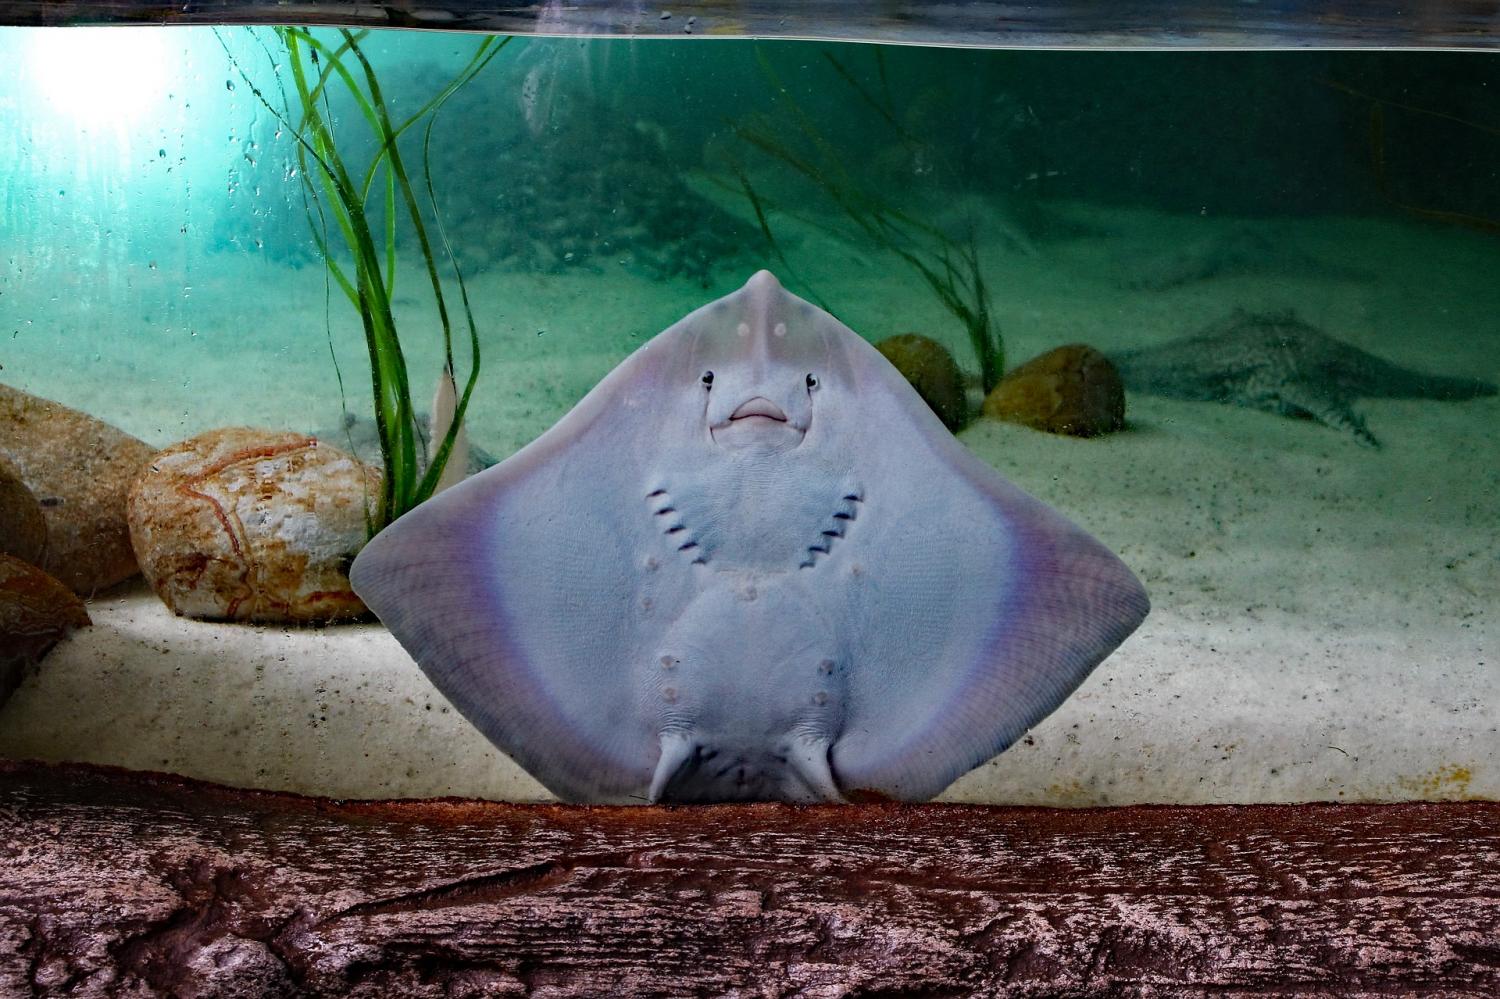 Stingrays found to chew their food before swallowing